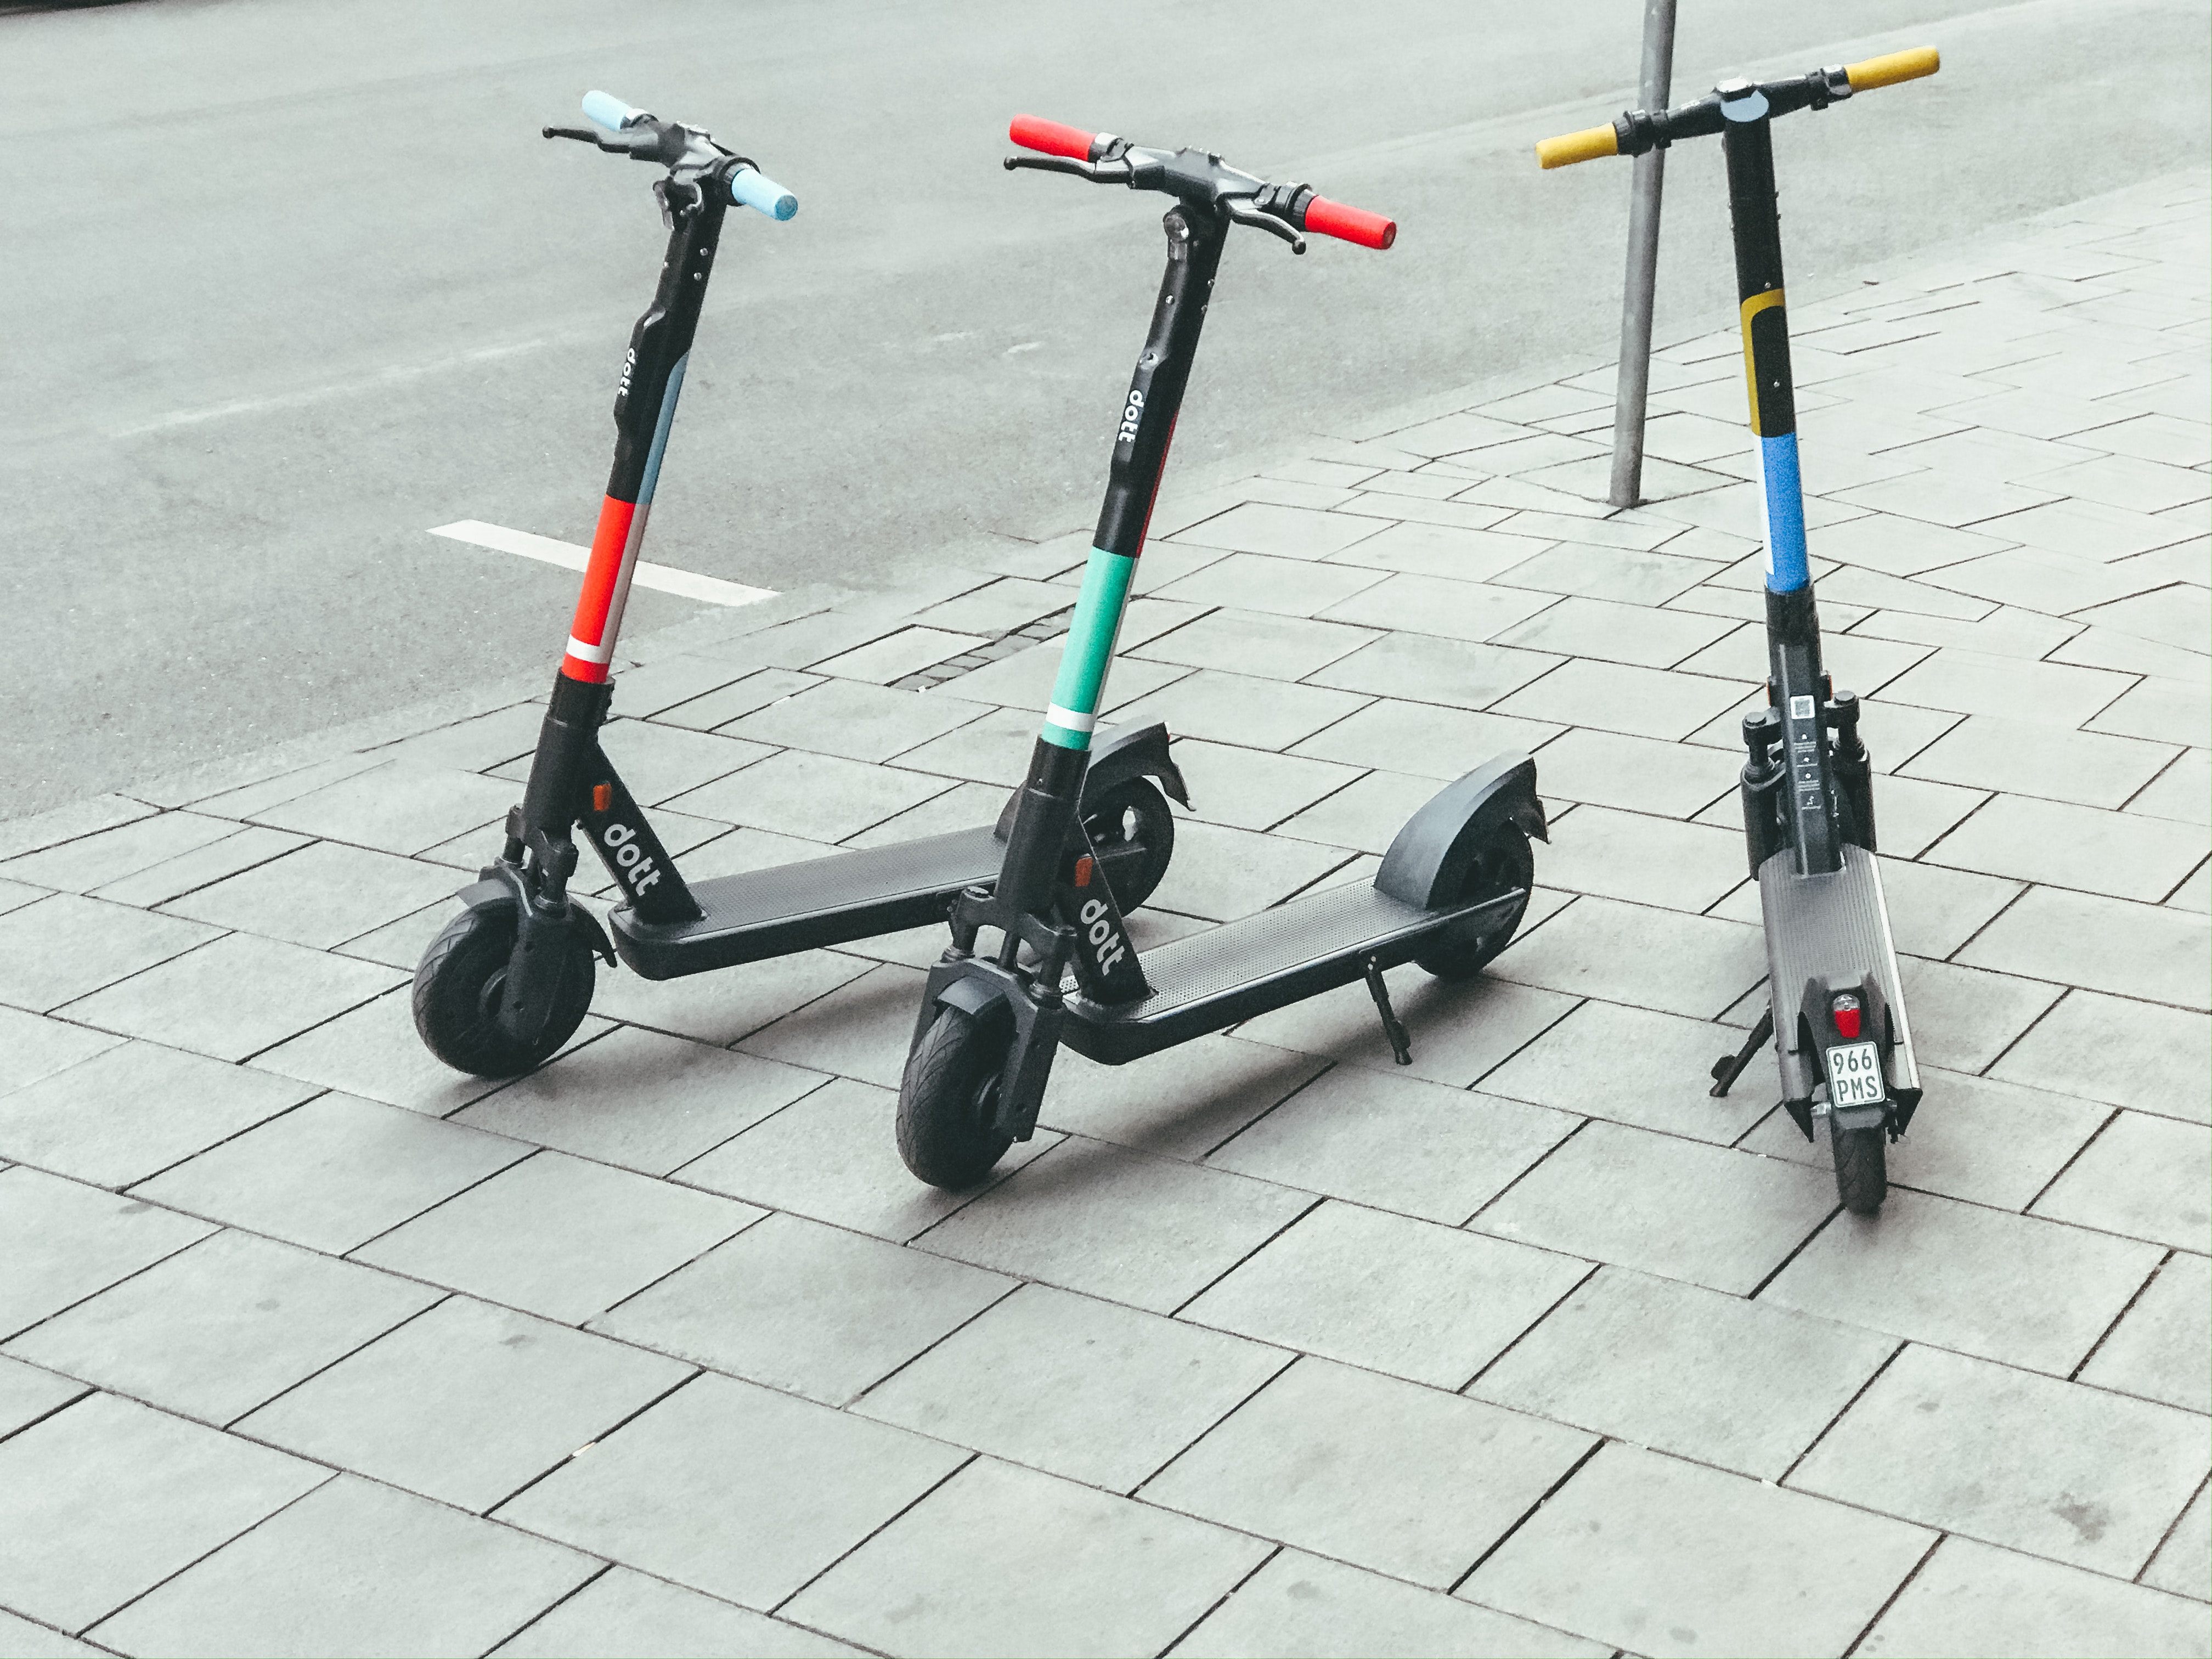 three scooters in a row parked on a sidewalk